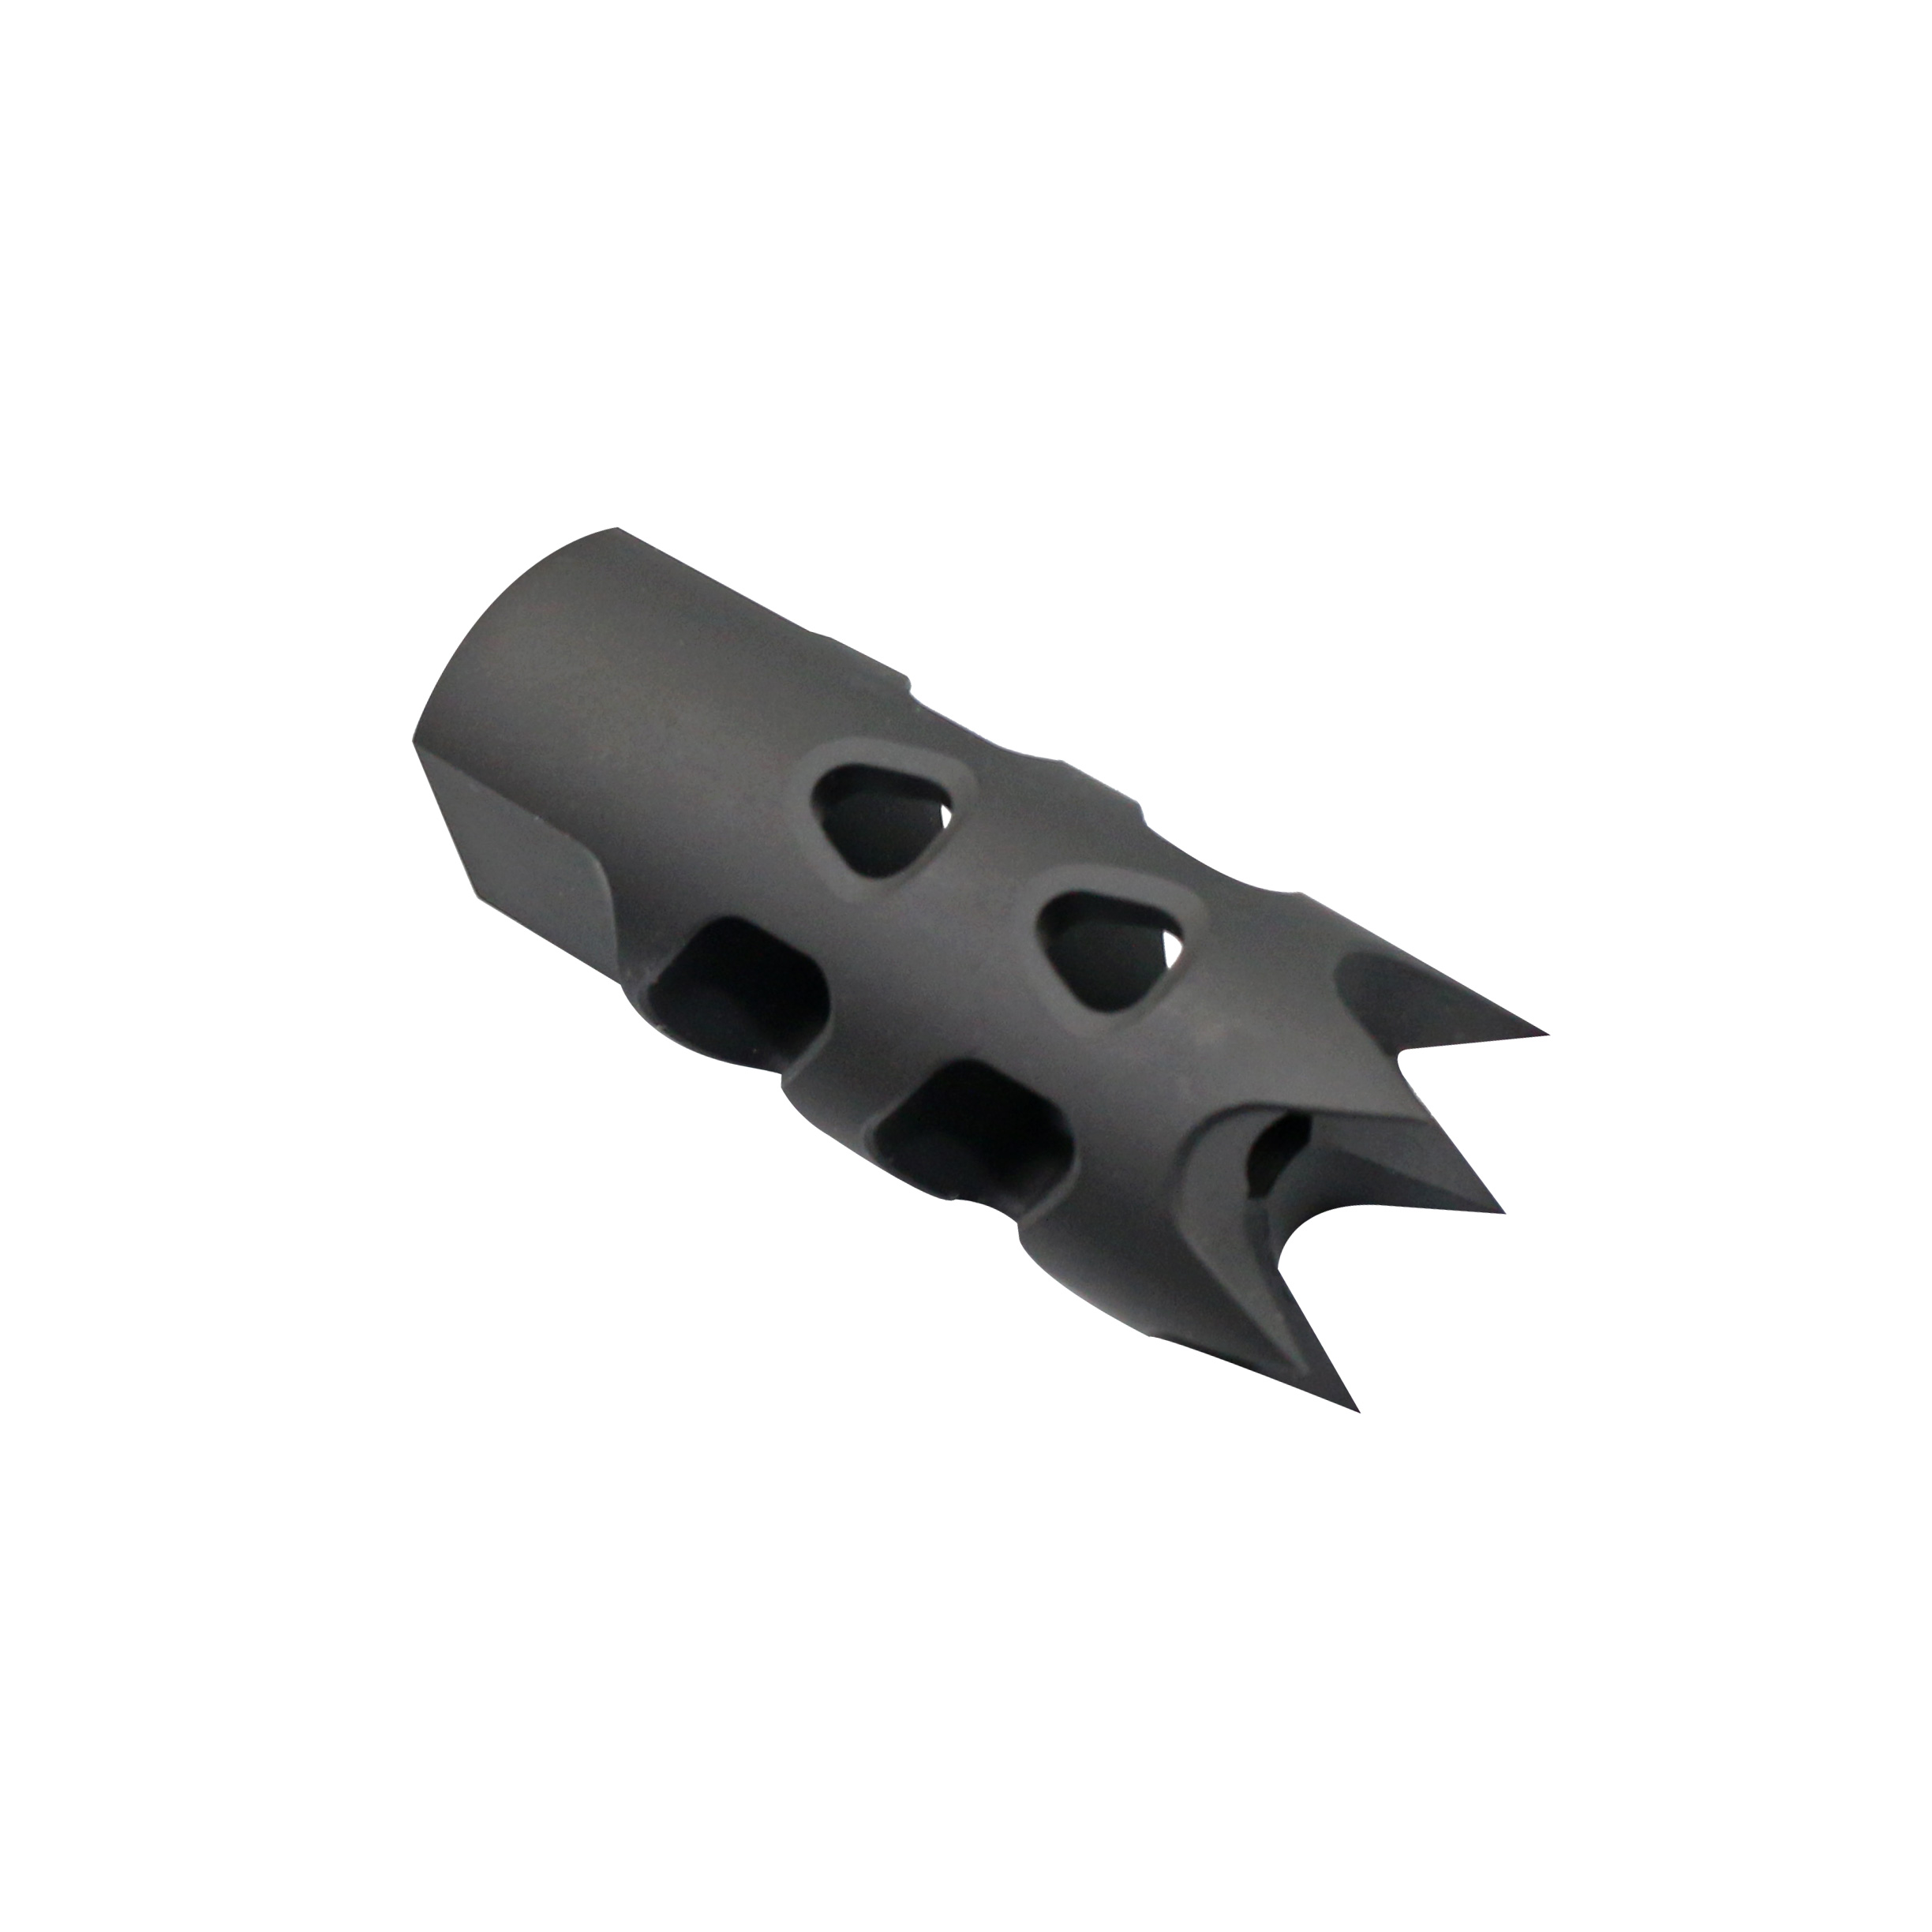 AR-15/.223/5.56 Steel Claw Muzzle Brake - OutdoorSportsUSA